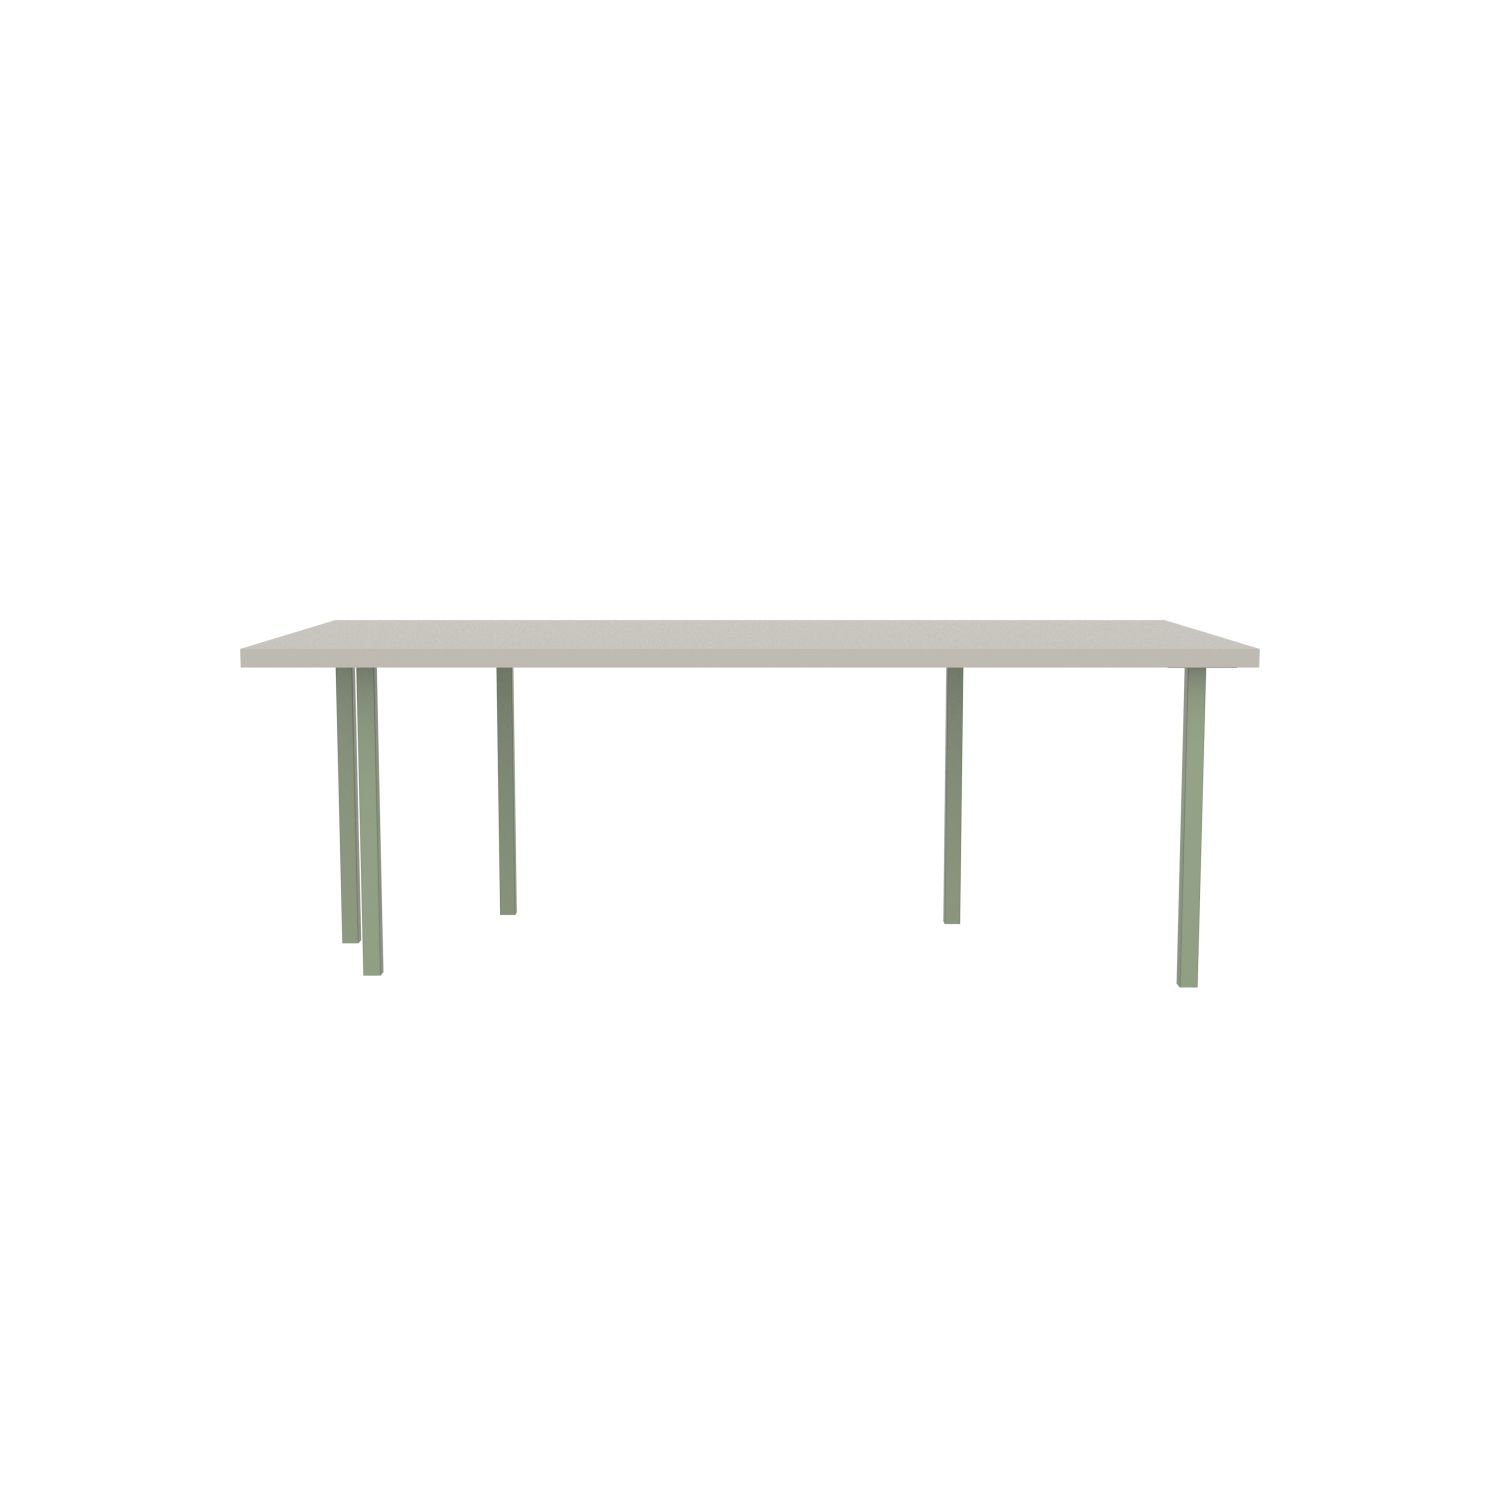 lensvelt bbrand table five fixed heigt 103x218 hpl white 50 mm price level 1 green ral6021